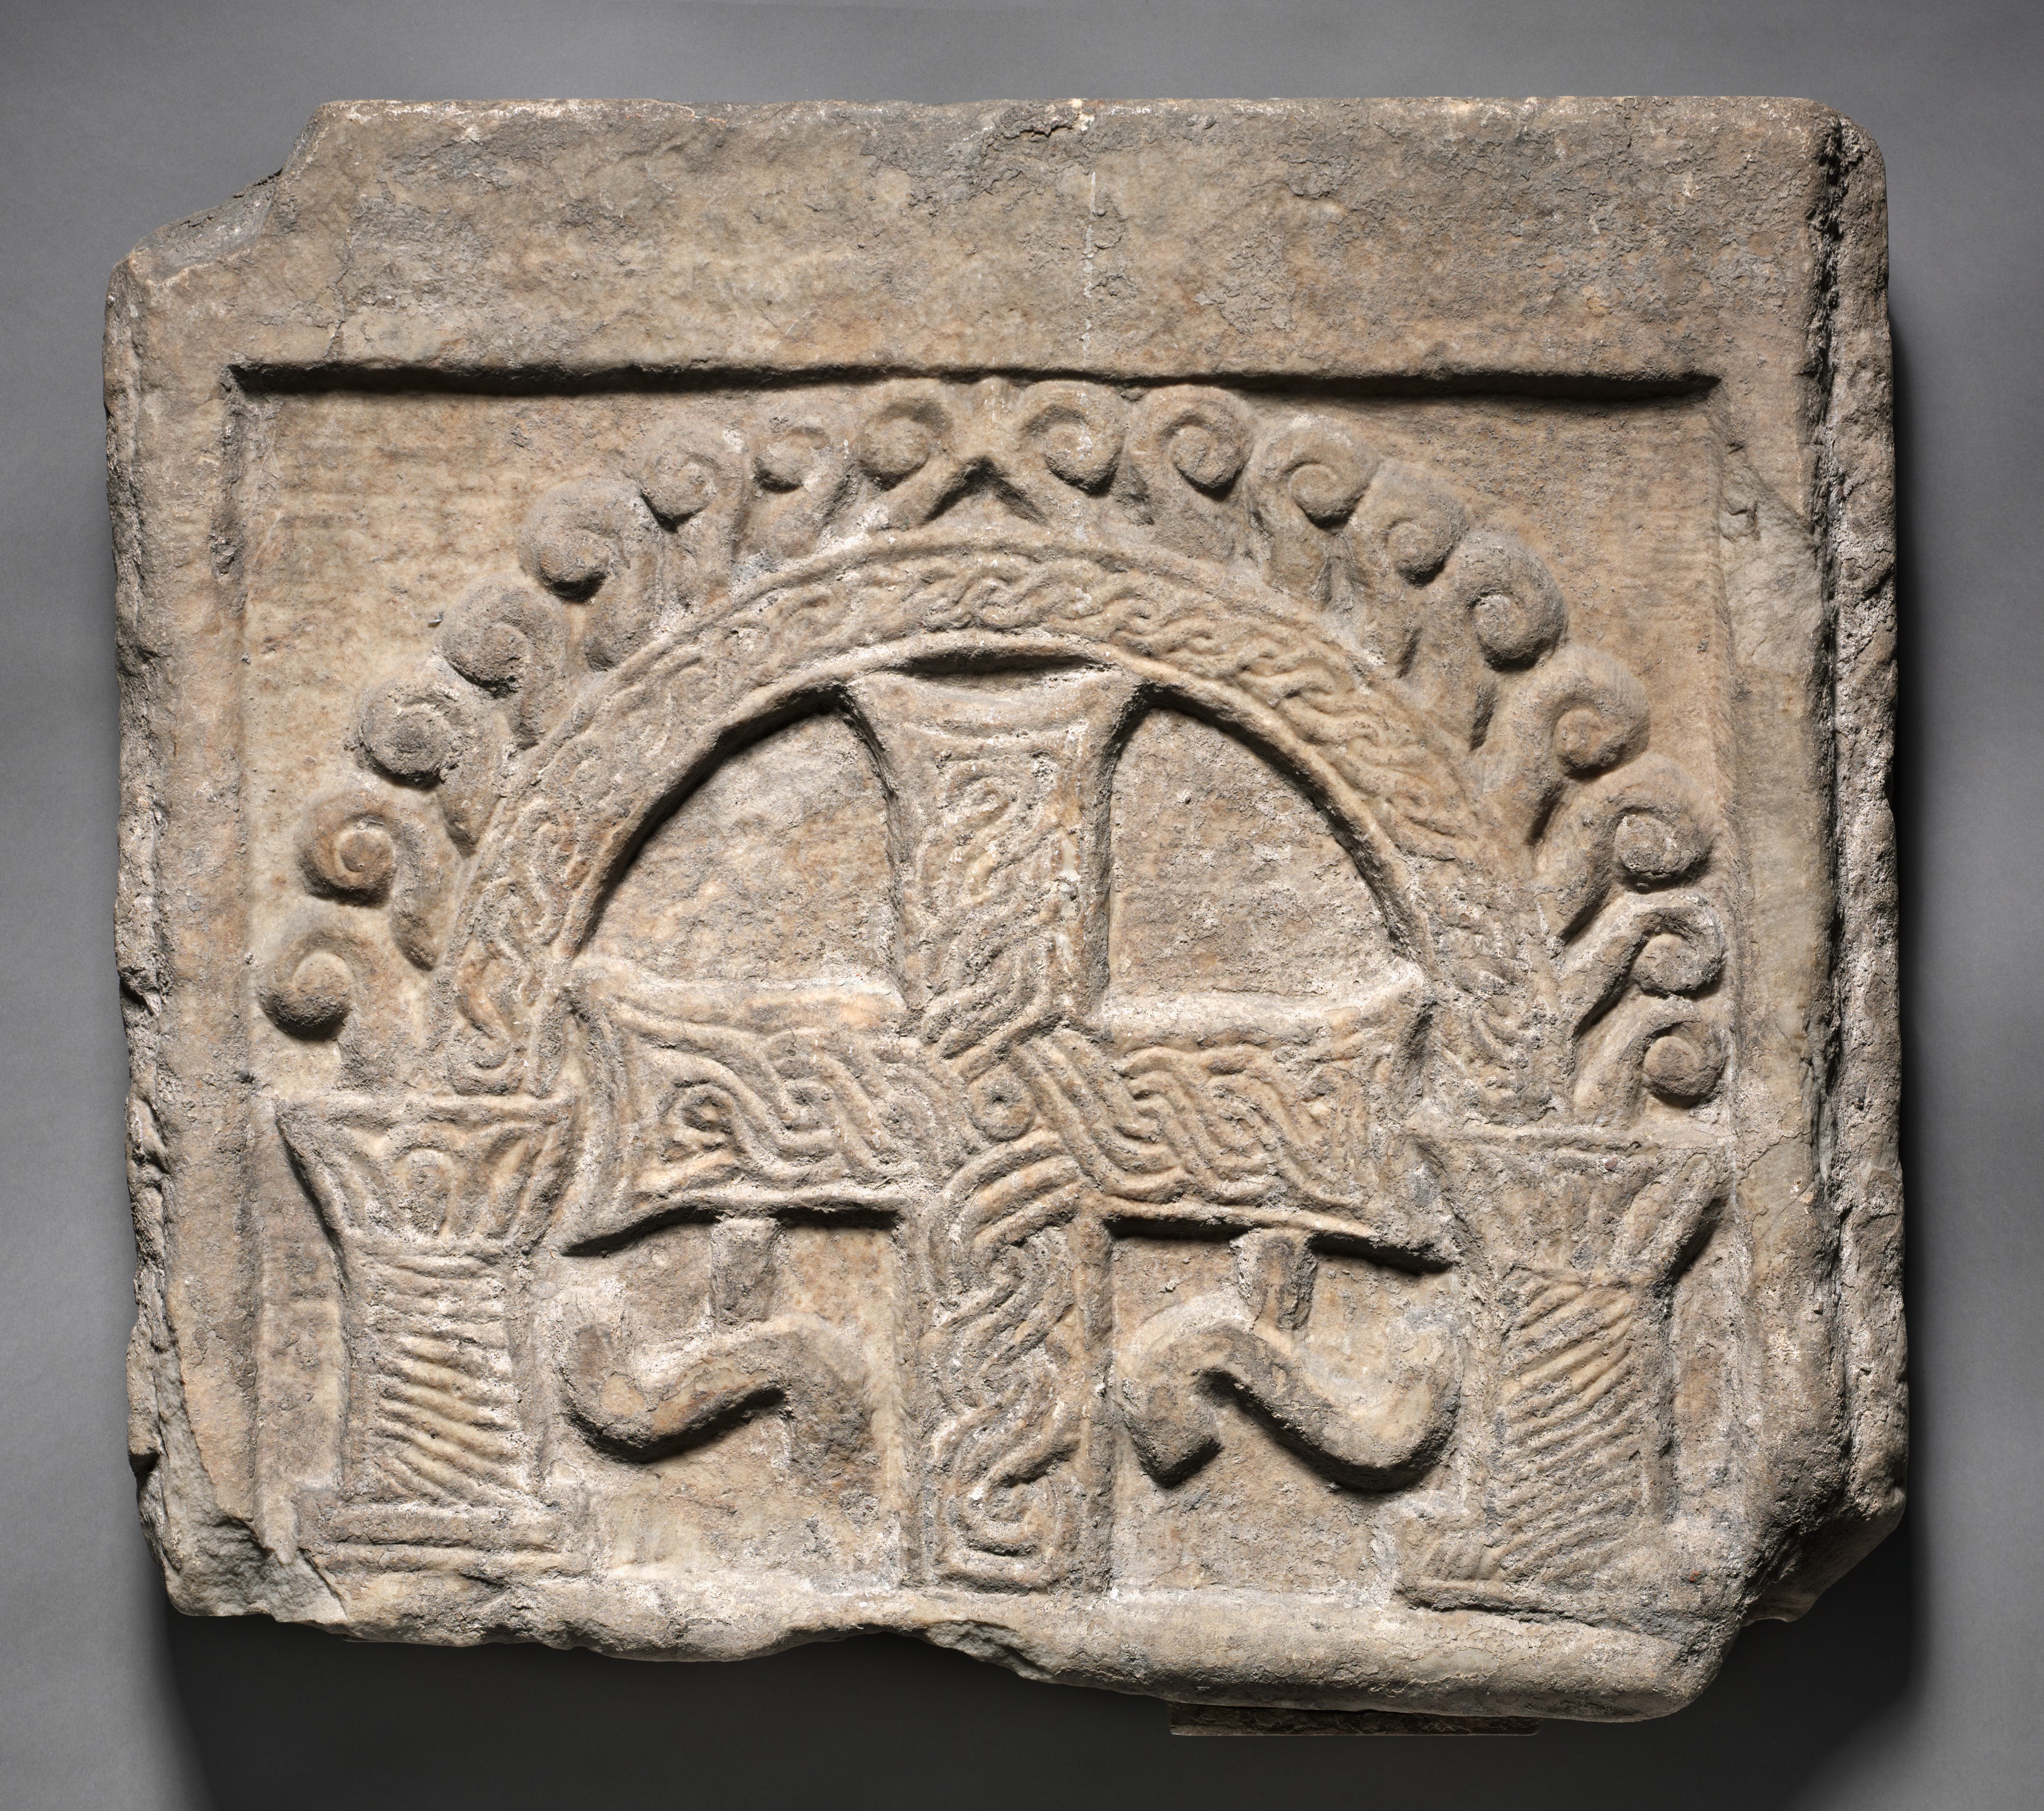 Relief Panel from the End of a Sarcophagus:  A Cross Within an Arch